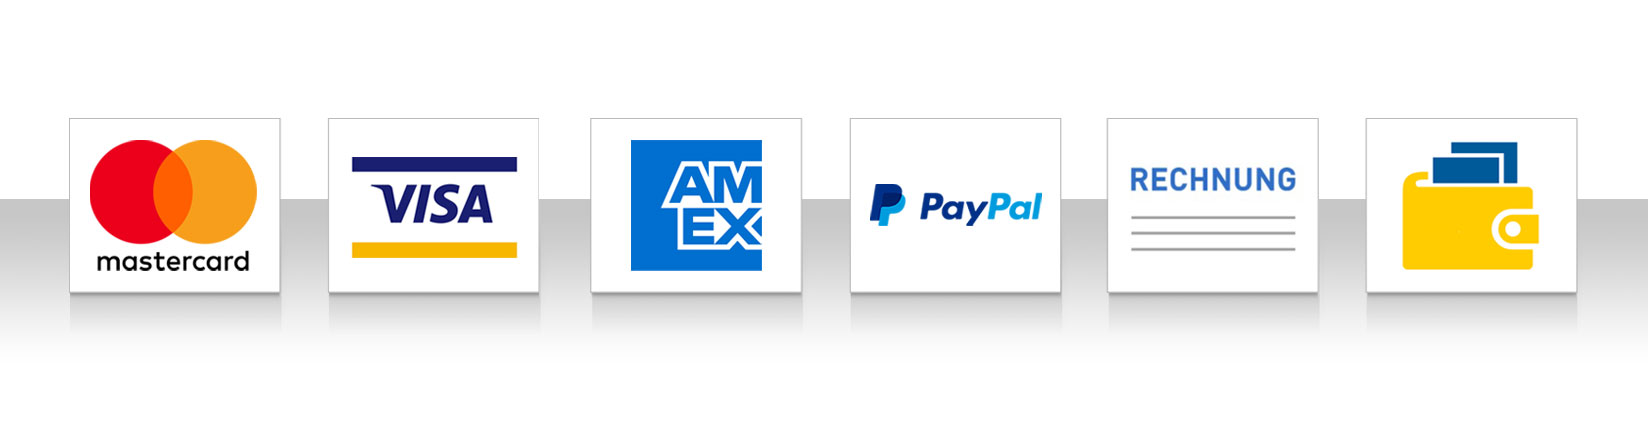 Payment methods: Credit card, Invoice, Paypal, Cash